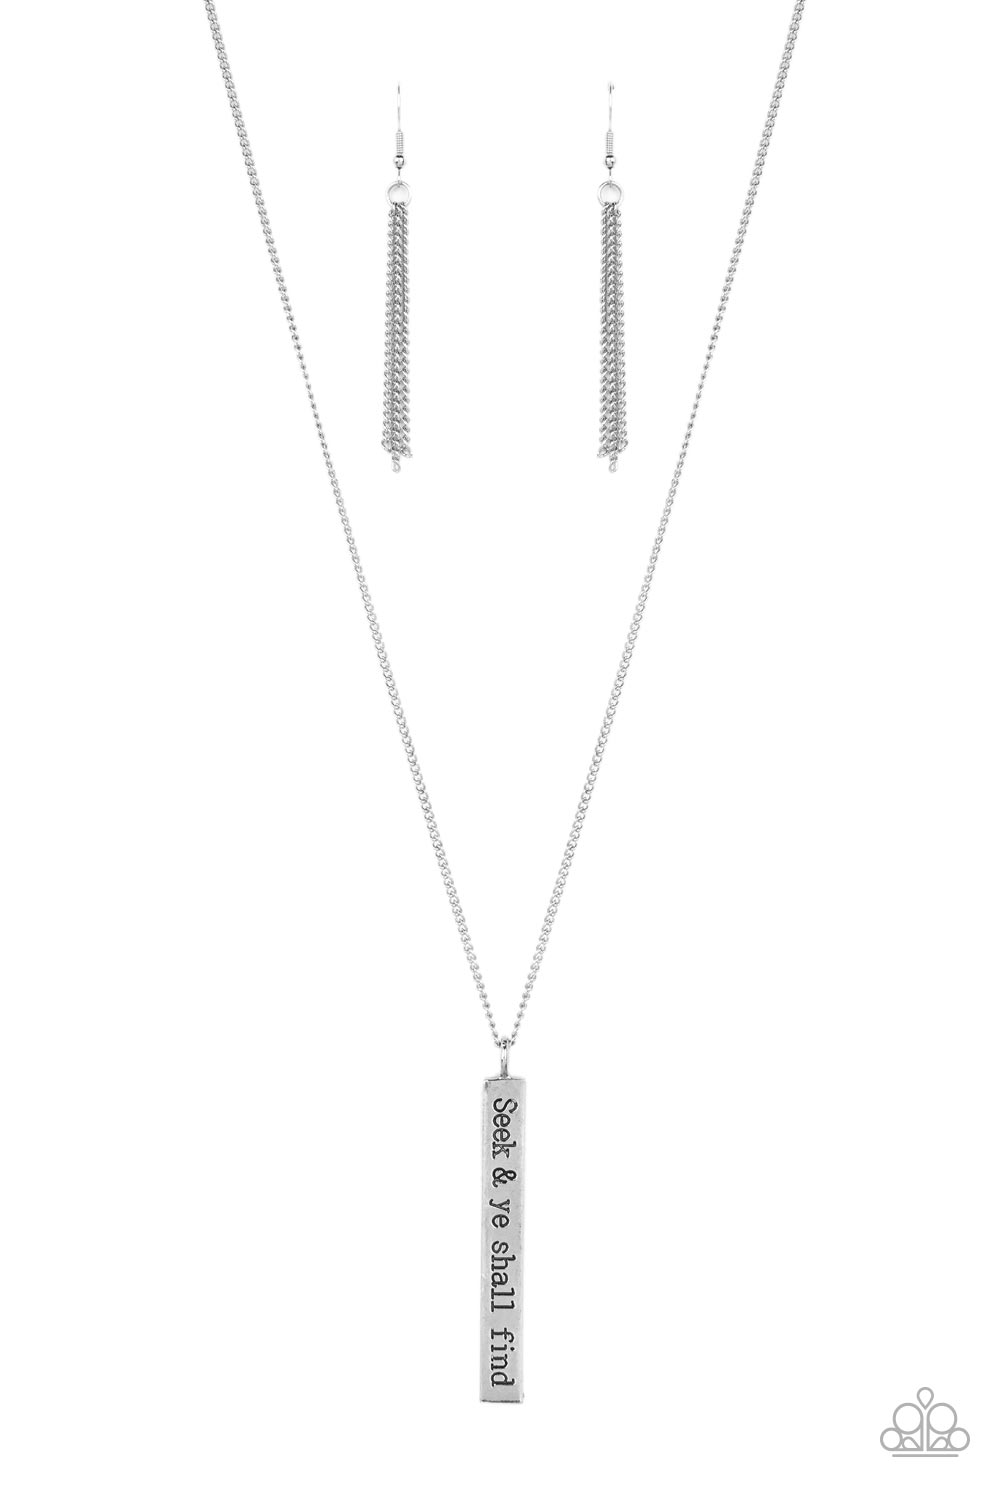 Matt 7:7 Paparazzi Accessories Necklace with Earrings  Silver